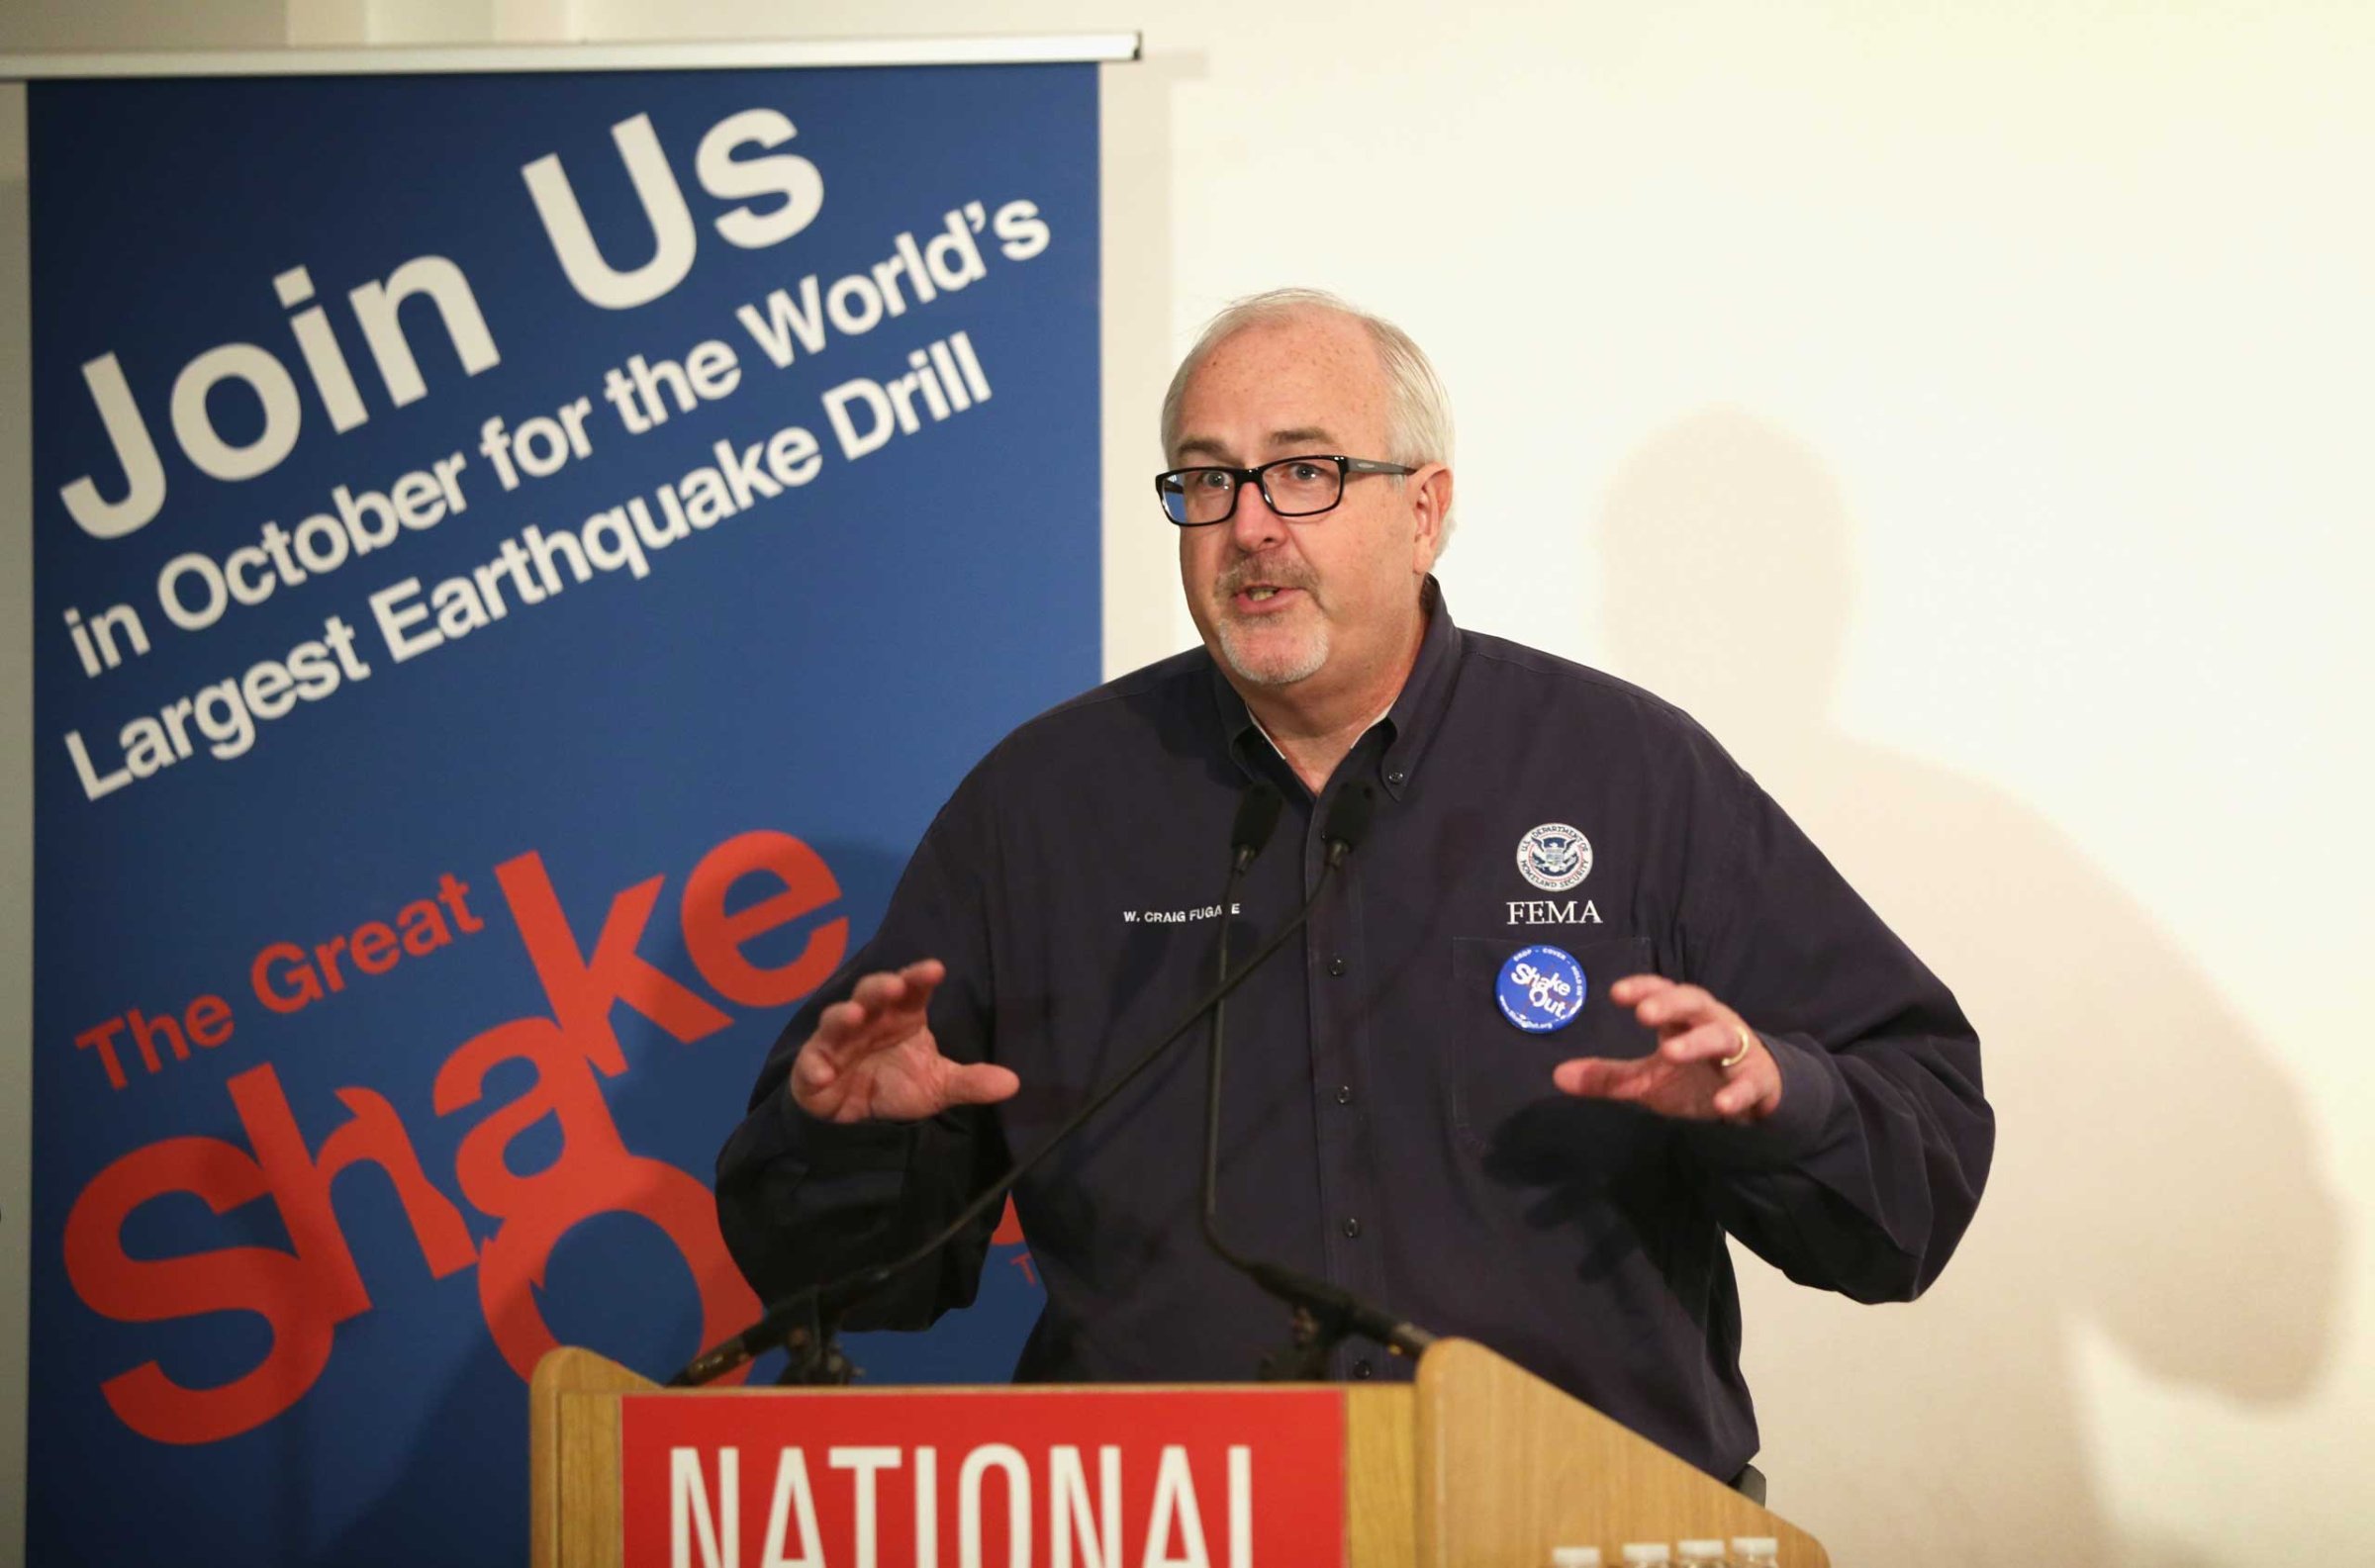 Federal Emergency Management Agency Administrator Craig Fugate speaks during an event on earthquake preparedness Oct. 14, 2014 at the National Building Museum in Washington, DC.